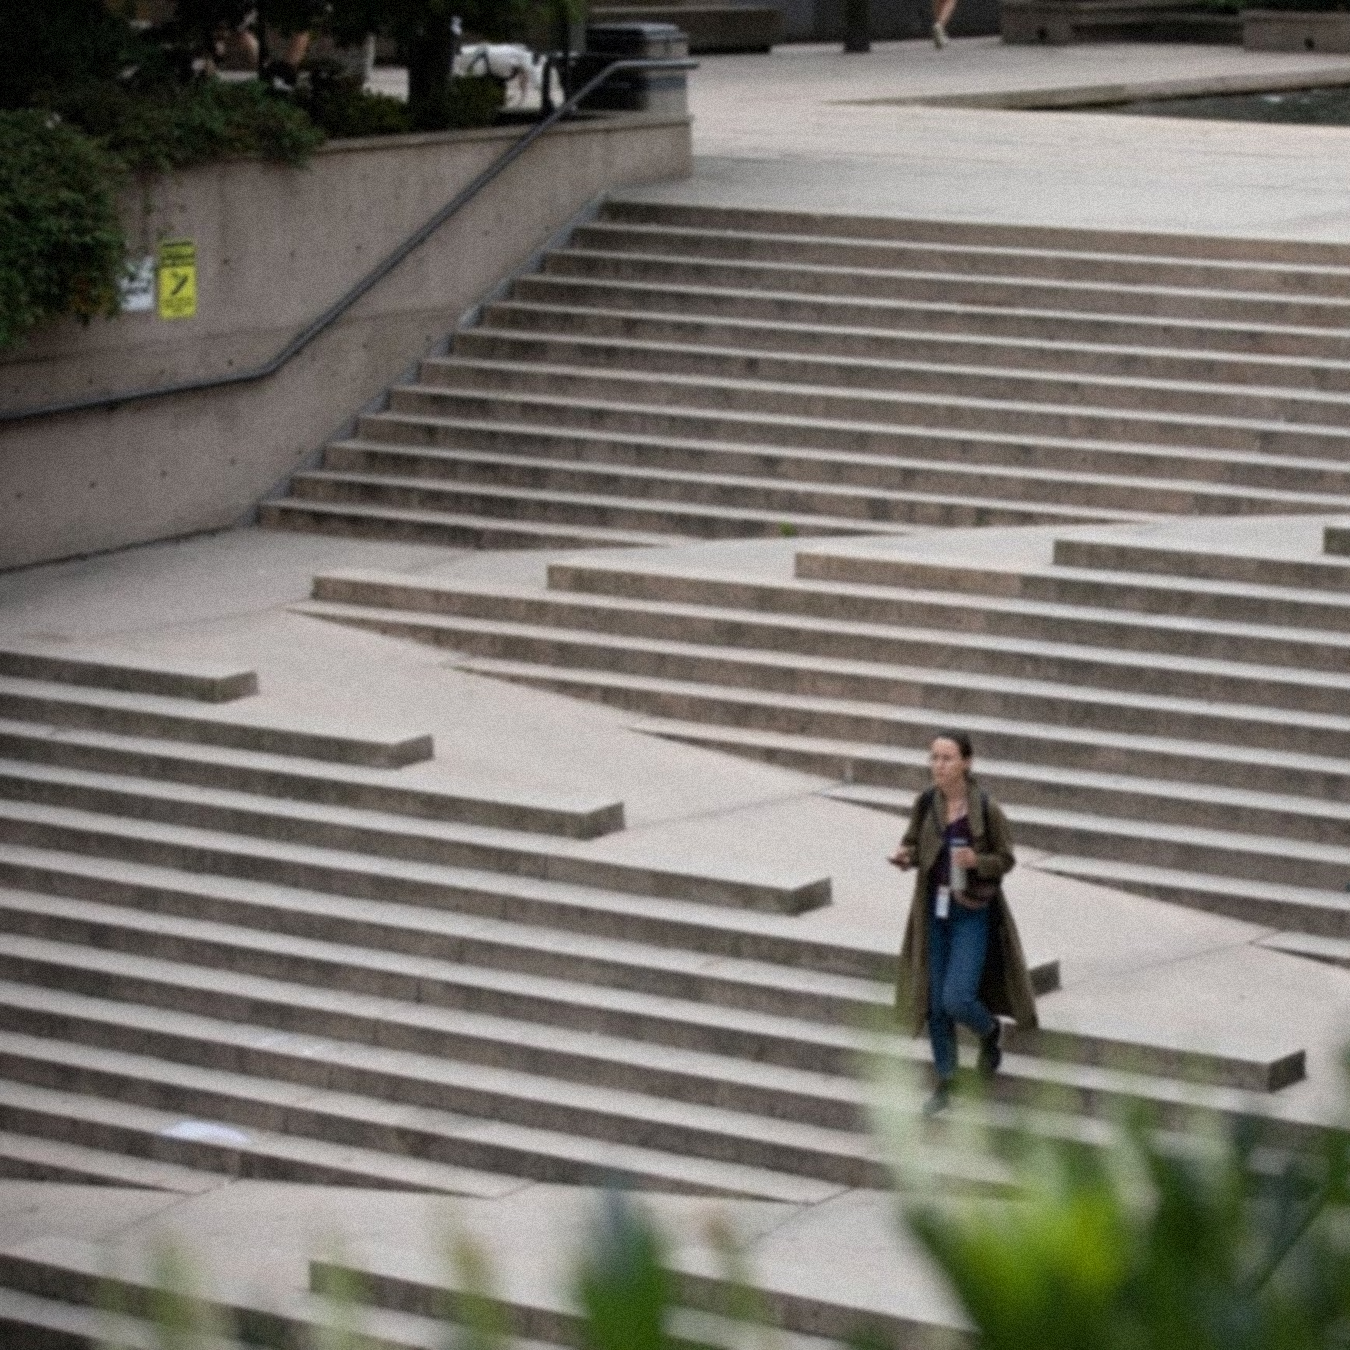 An image of the infamous Robson Square stair / ramp combination. They are a wide set of stairs, with a ramp built into the stairs that goes from left to right at an angle. There are no rails for the ramp, and the steps are staggered to accommodate the ramp’s placement.